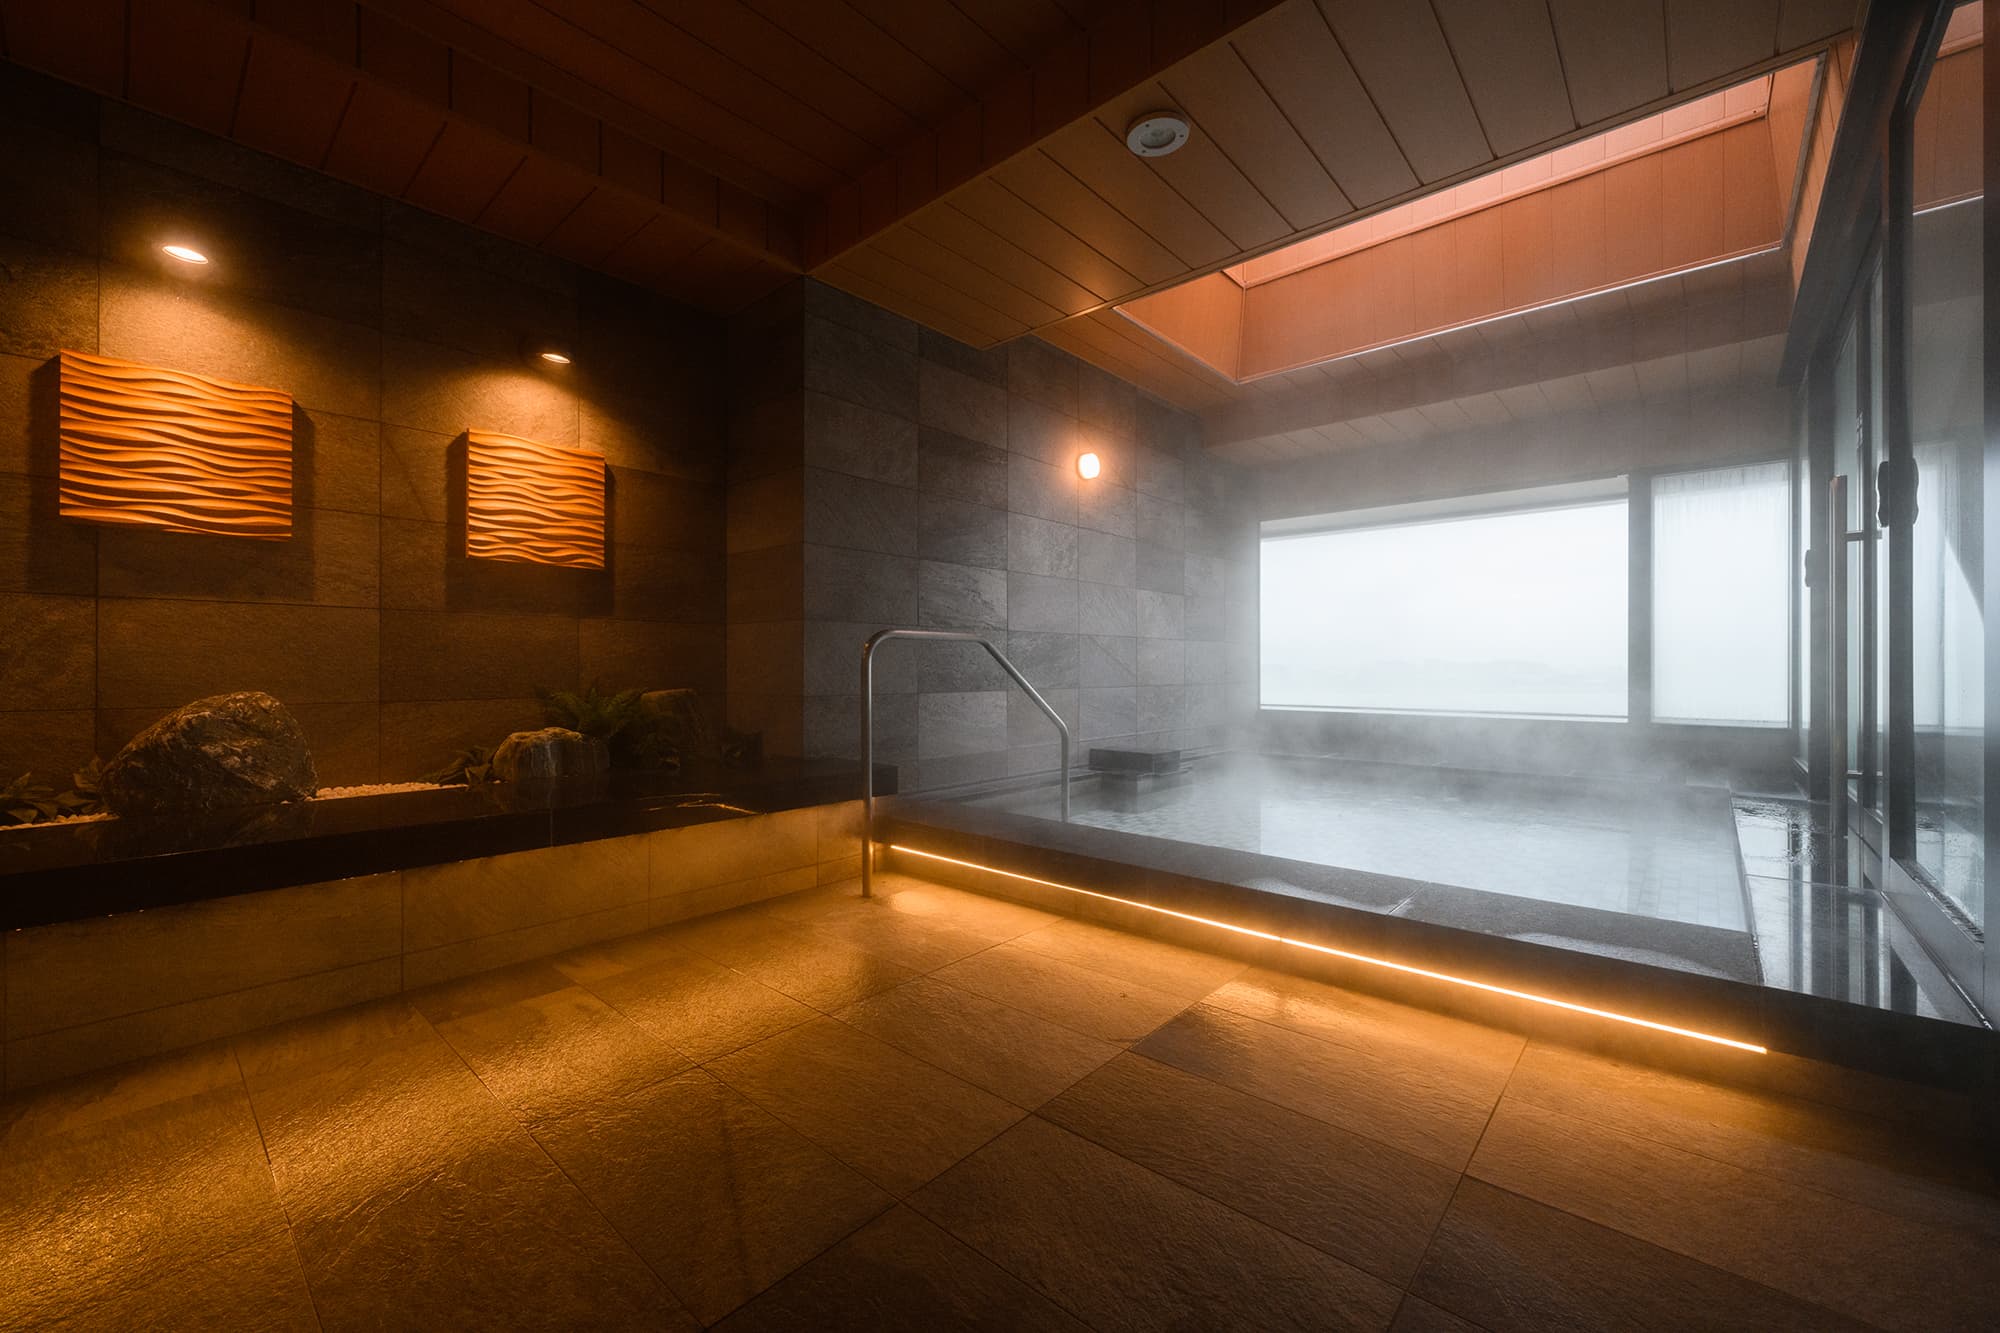 Large bath where you can relax